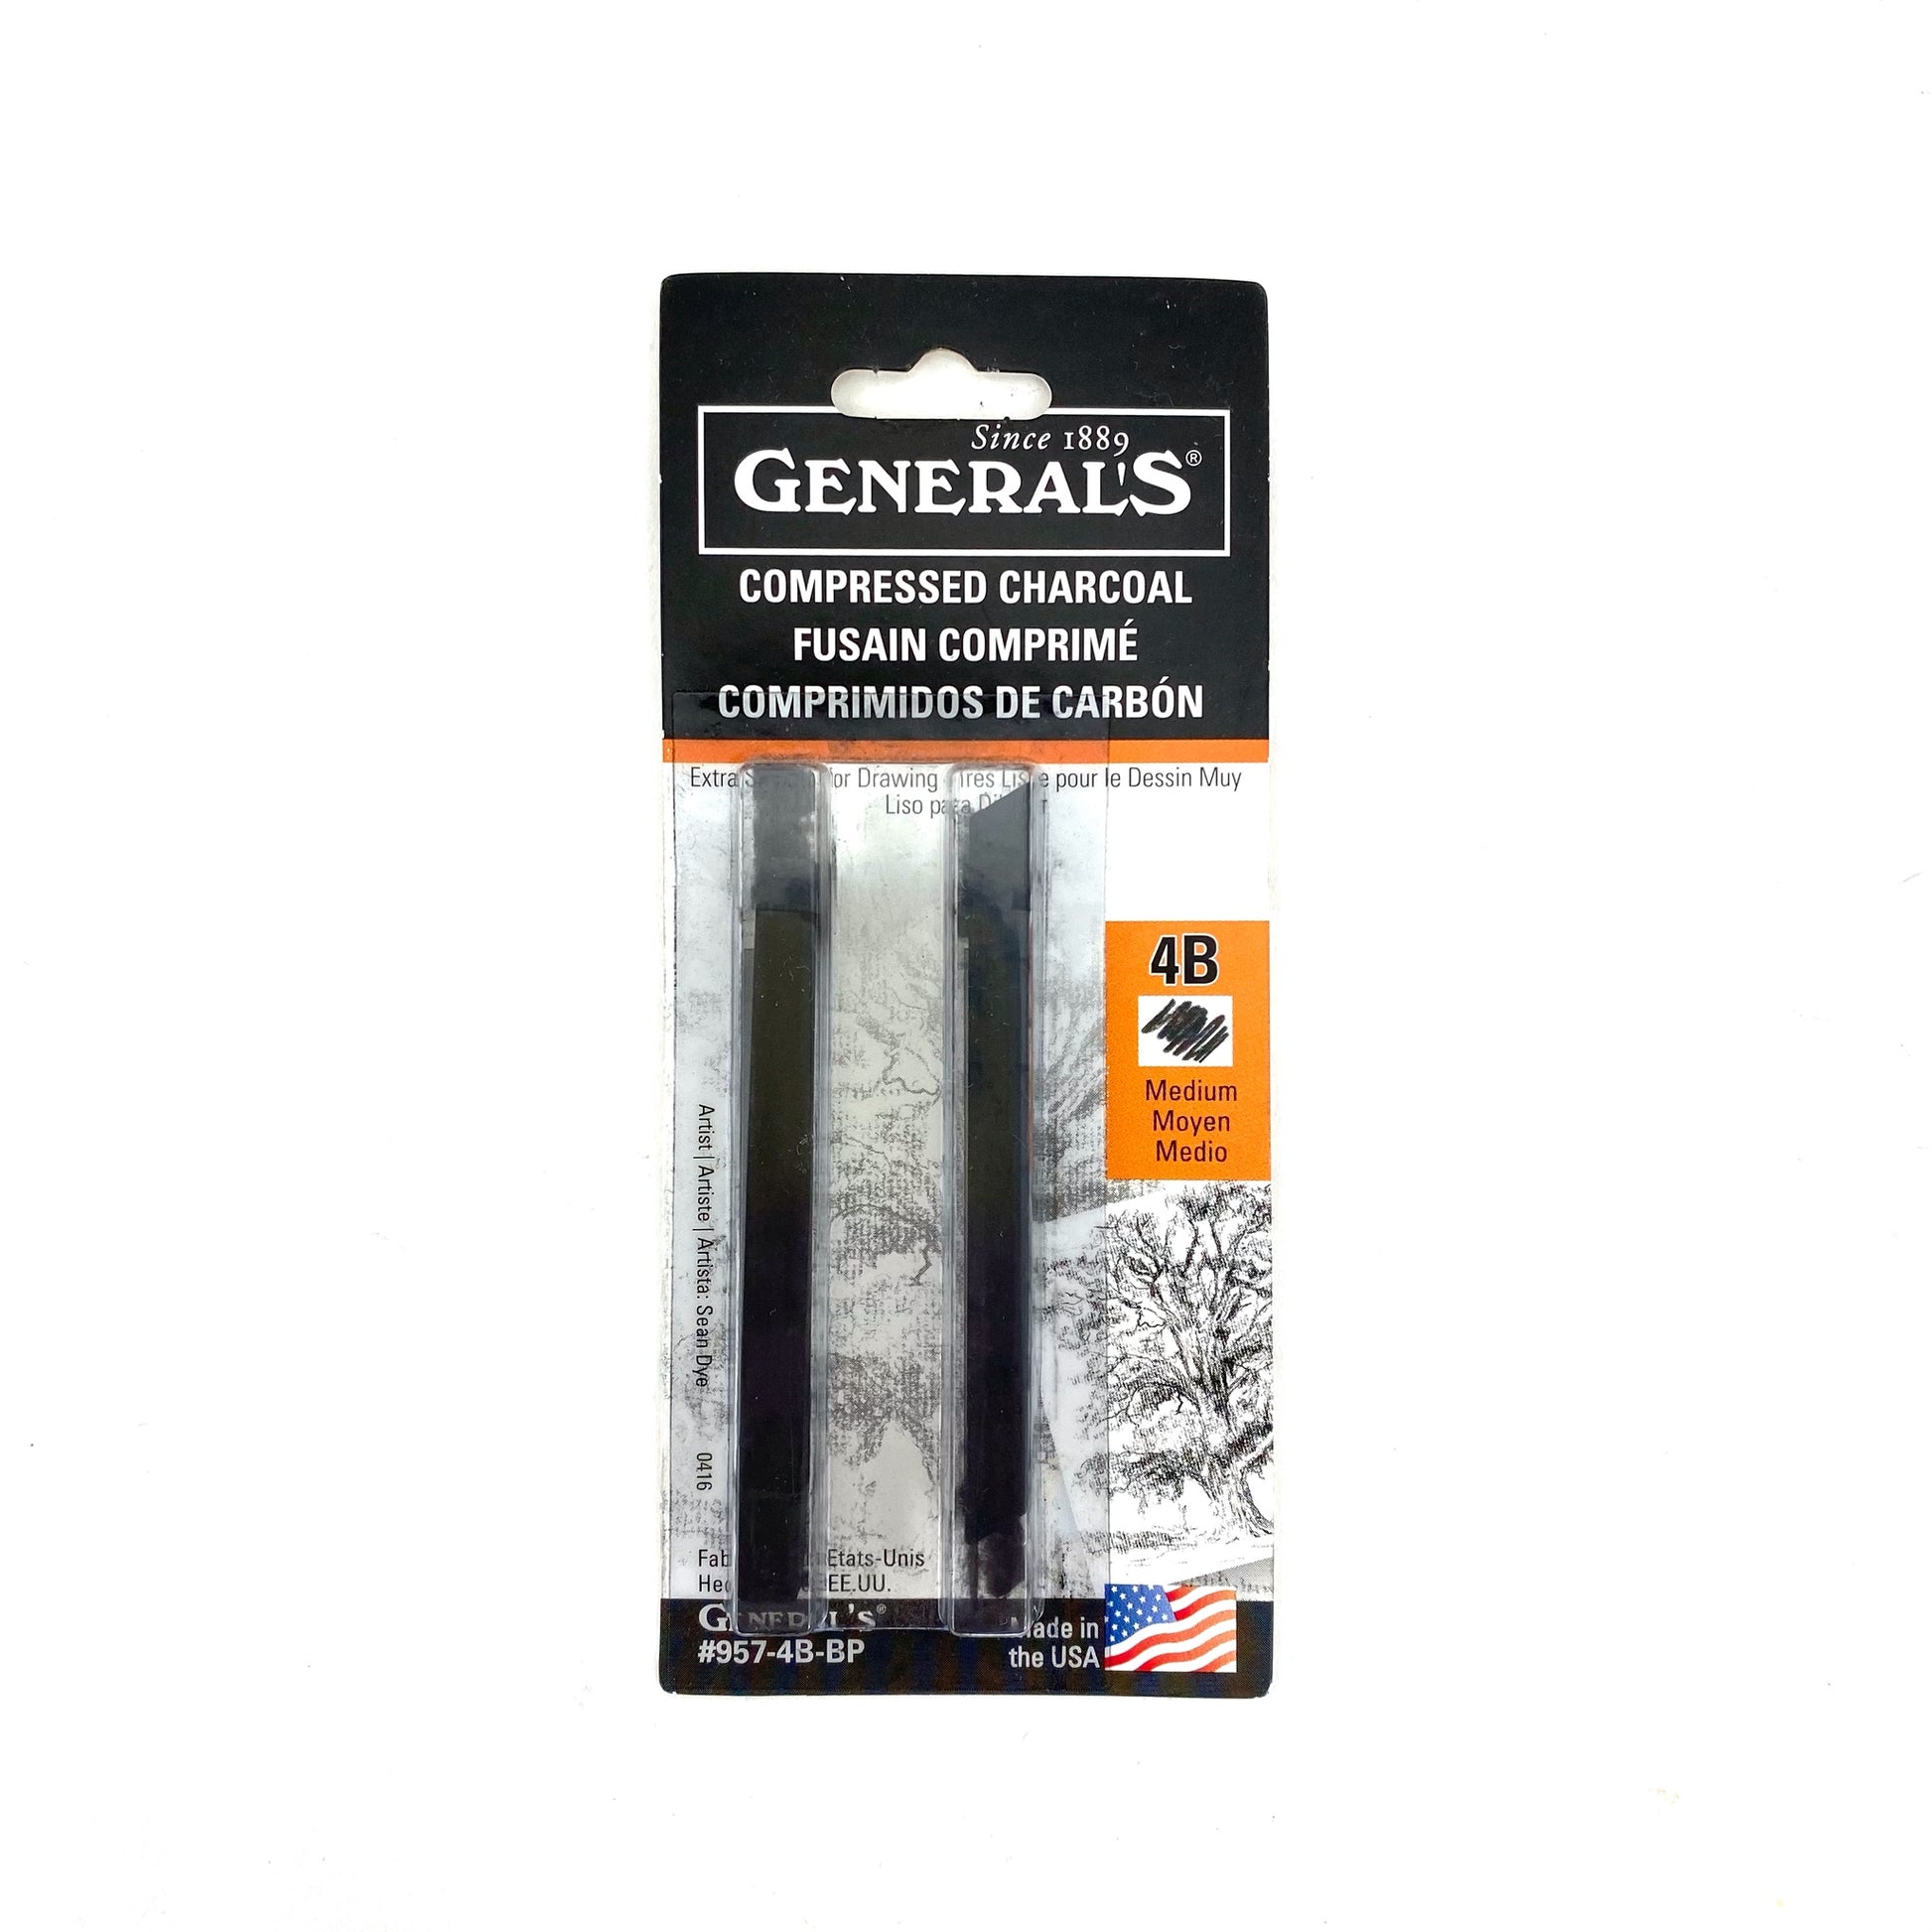 General's Compressed Charcoal 12-Count 6B Set